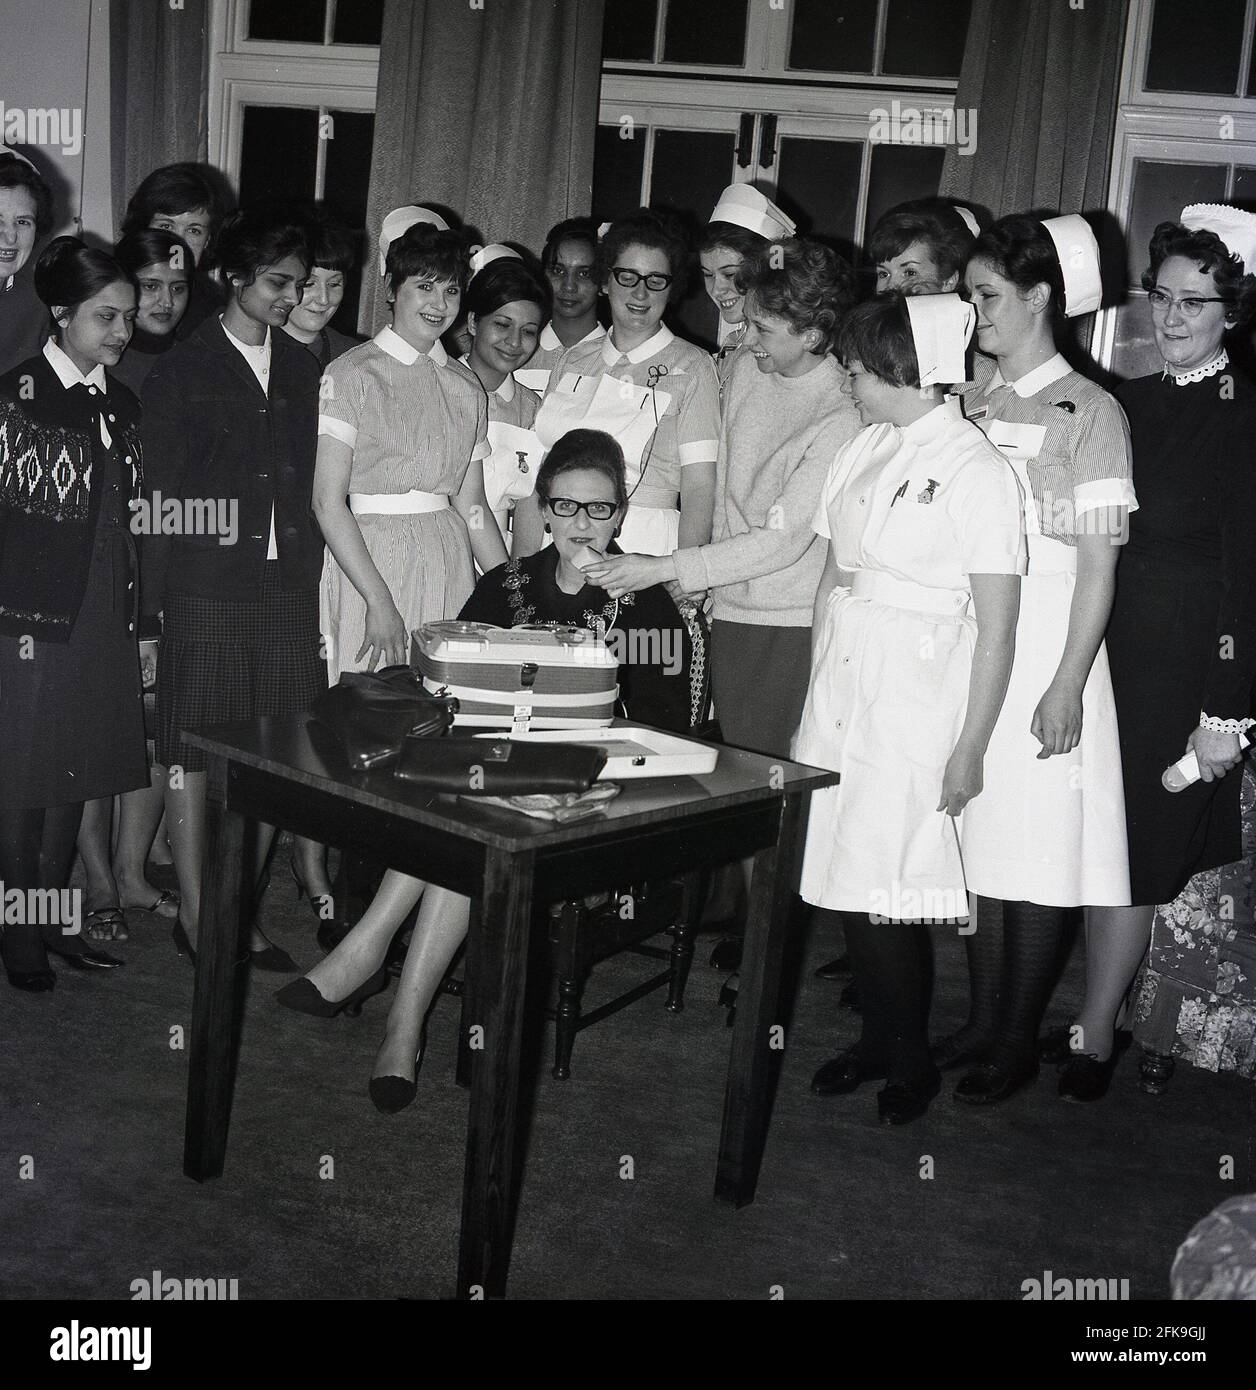 1960s, historical, at a South East London hospital, a group of nurses stand around a seated Lady Mayoress, with one of them recording her speaking using a Grundig portable reel to reel tape recorder. Established in 1945 in Nuremberg, Germany by radio dealer, Max Grundig, the German manufacturer's audio consumer electronic products were highly regarded in this era. Stock Photo